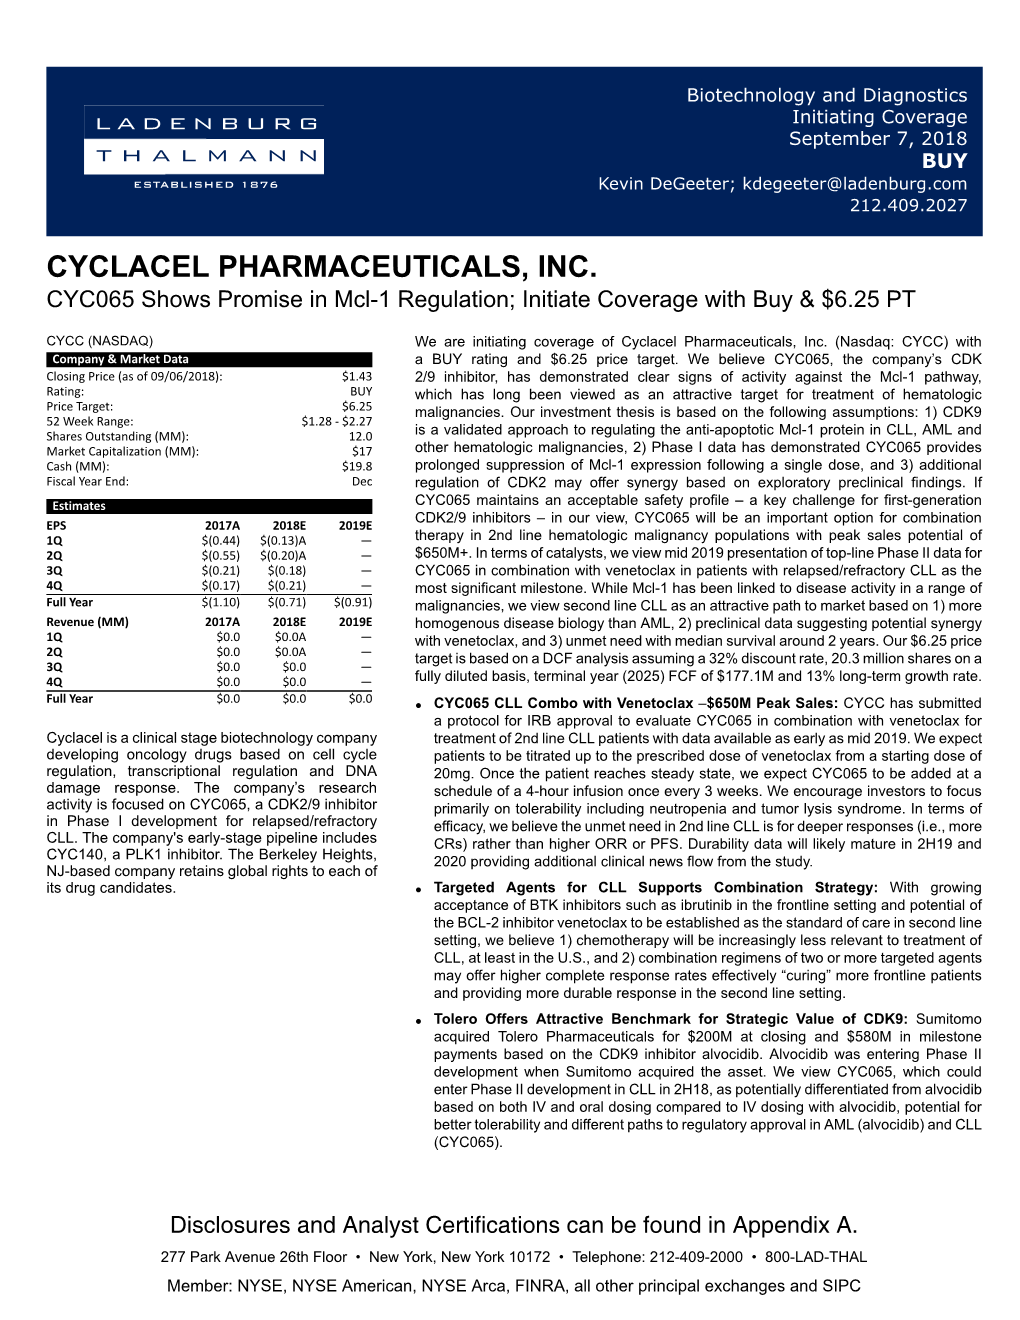 CYCLACEL PHARMACEUTICALS, INC. CYC065 Shows Promise in Mcl-1 Regulation; Initiate Coverage with Buy & $6.25 PT